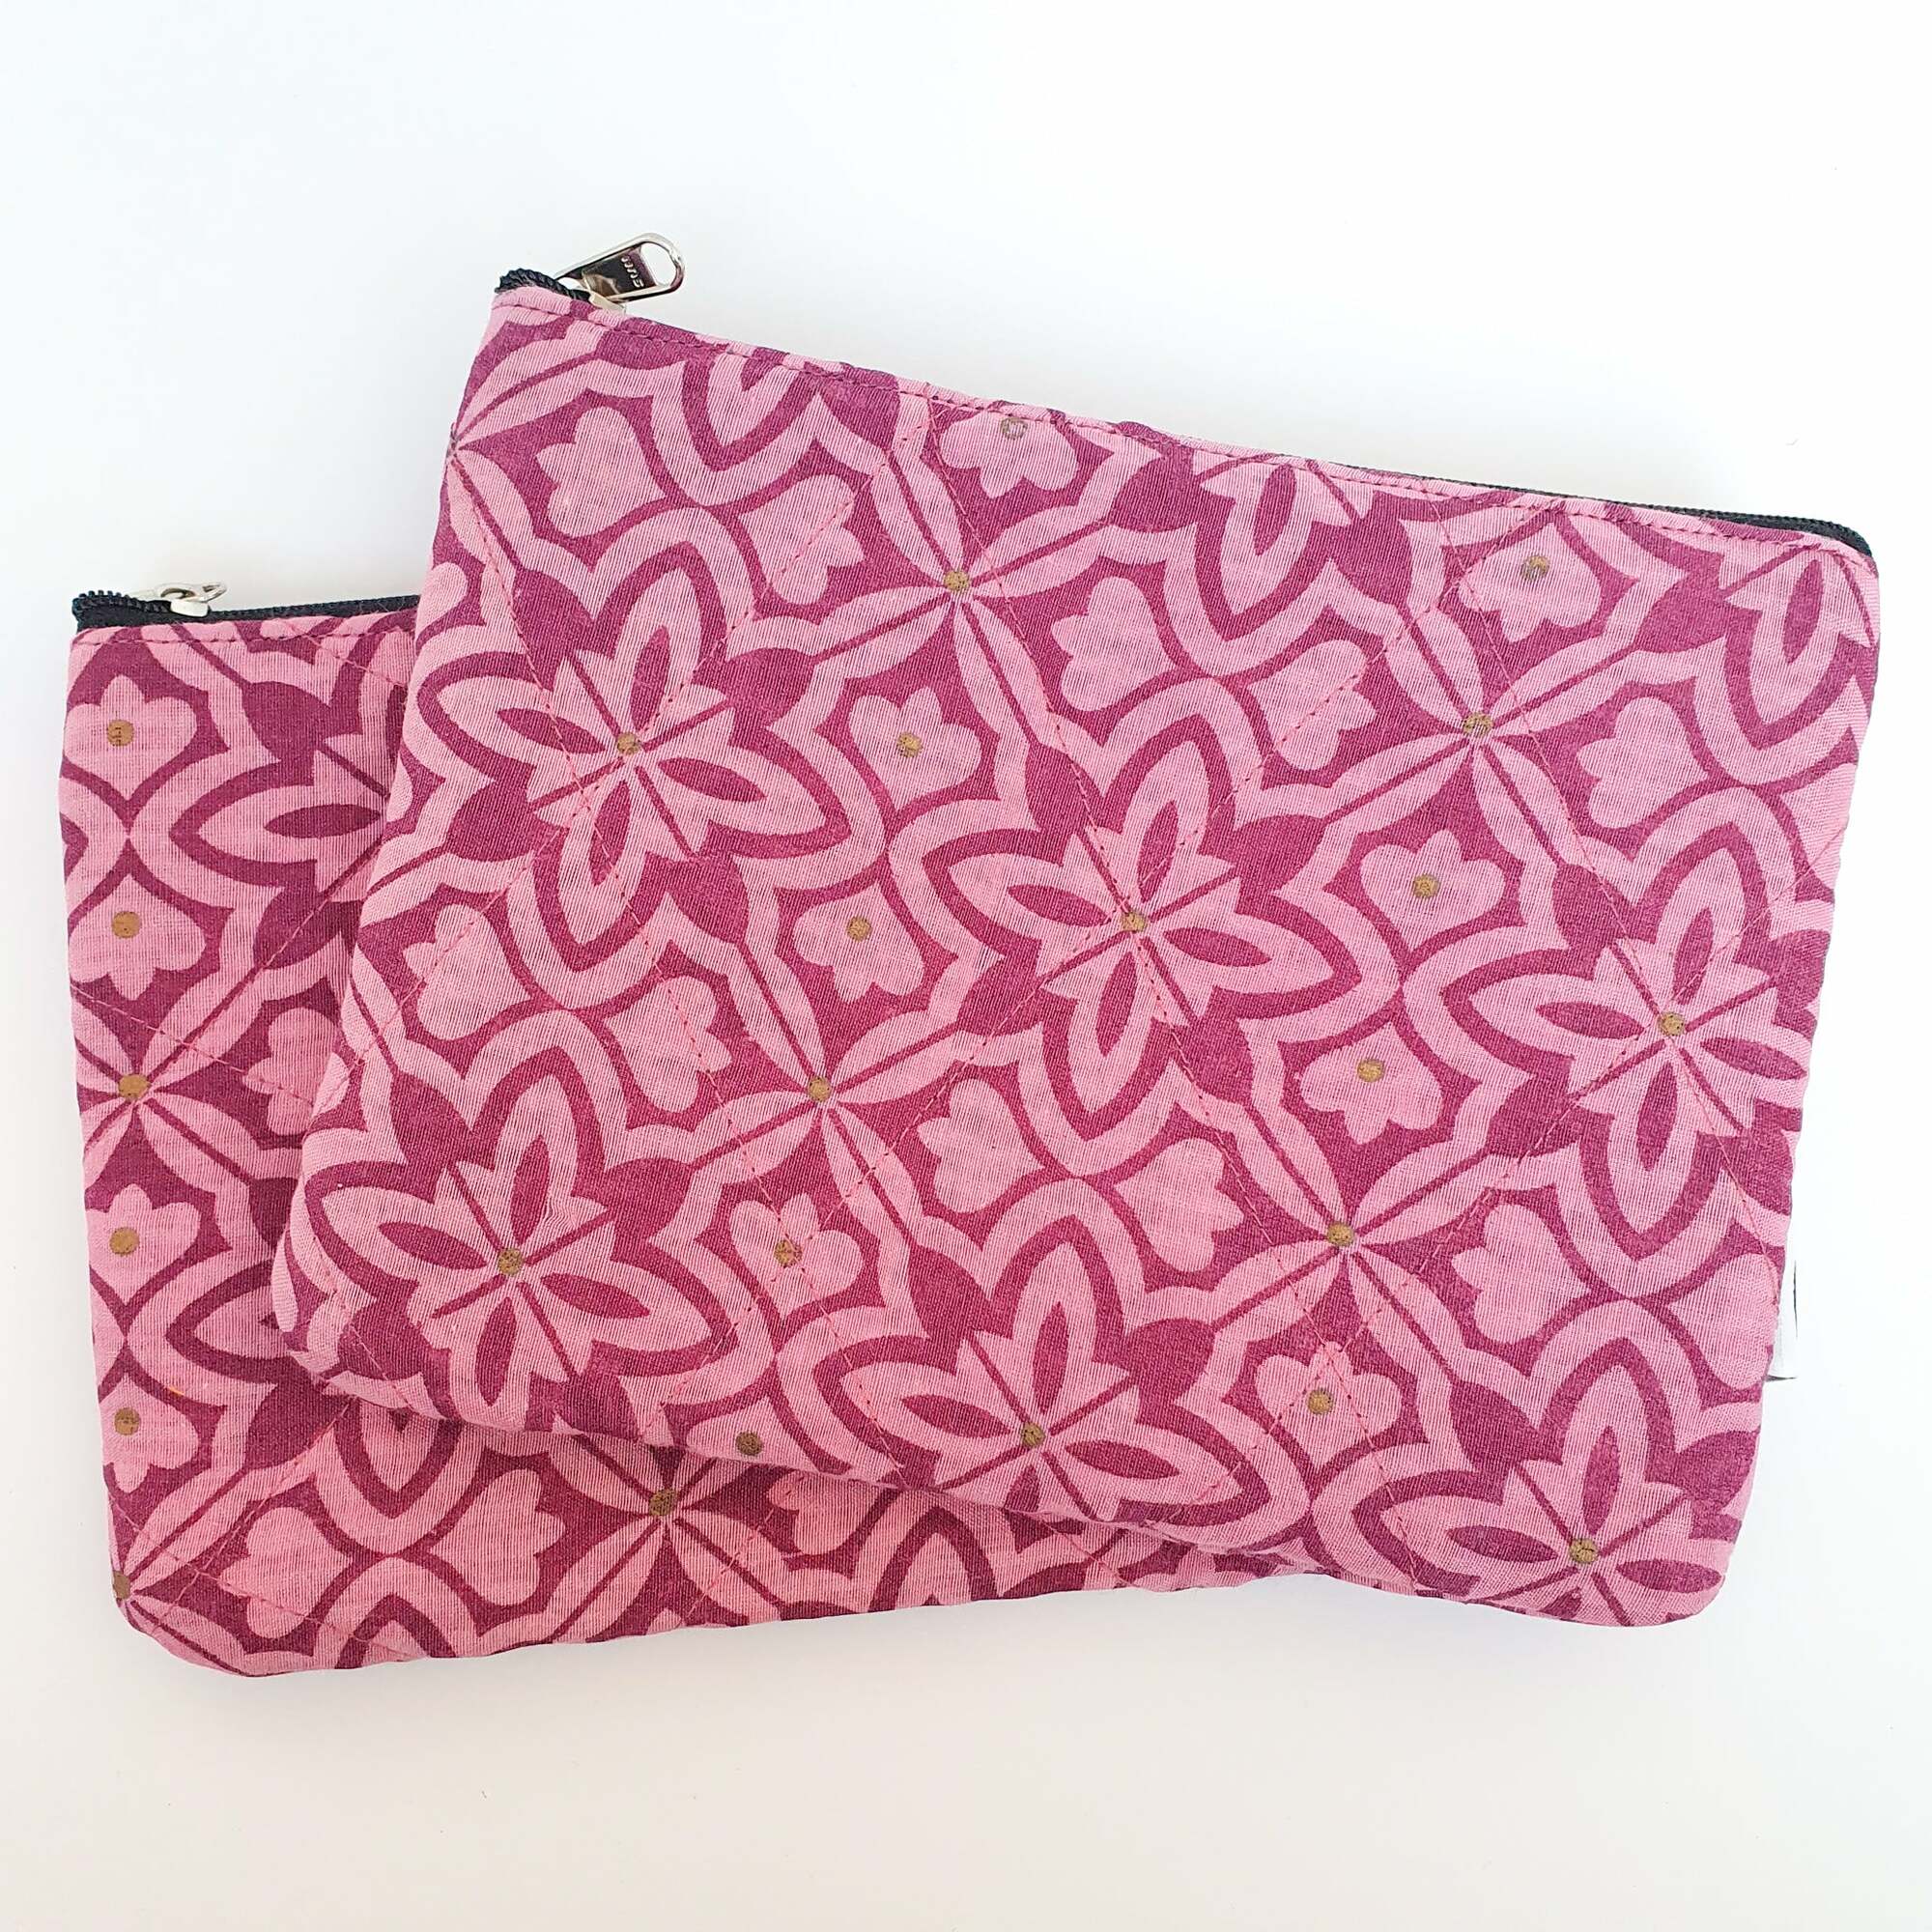 Flat upcycled sari pouch, large wallet, pink geometric design